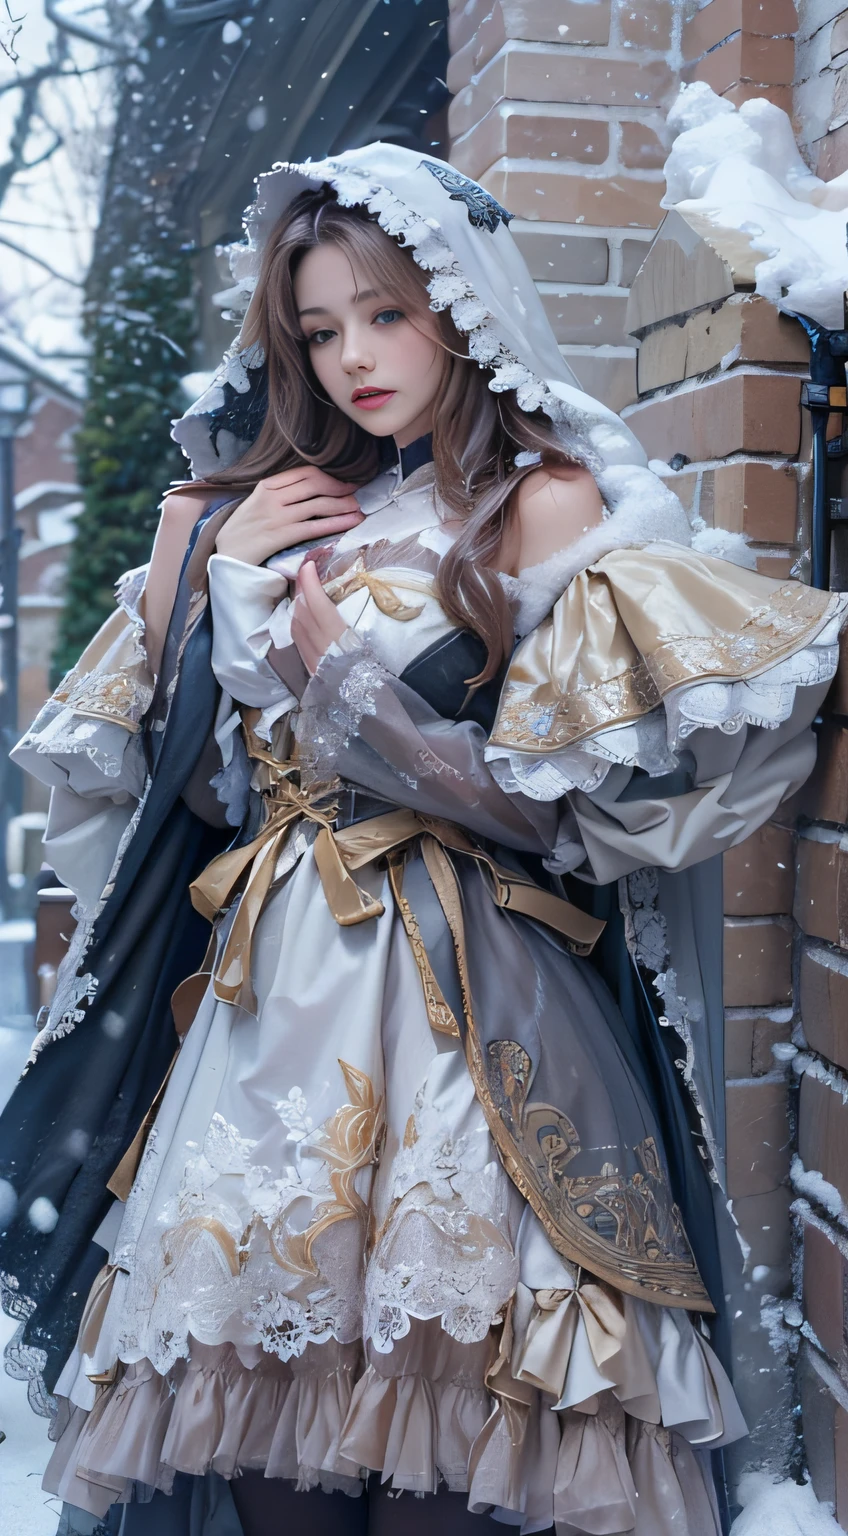 （8K， RAW Photos， best qualtiy， tmasterpiece：1.2），（realisticlying， photos realistic：1.4)，Hide your face with sadness，
Lolita costume，Lace， aerith gainsborough， The upper part of the body，upper limbs， undergarment，exposed bare shoulders， takeout， (Outside，covered in snow，cloaks，) hightquality， adobe lightroom， highdetailskin， looking at viewert，